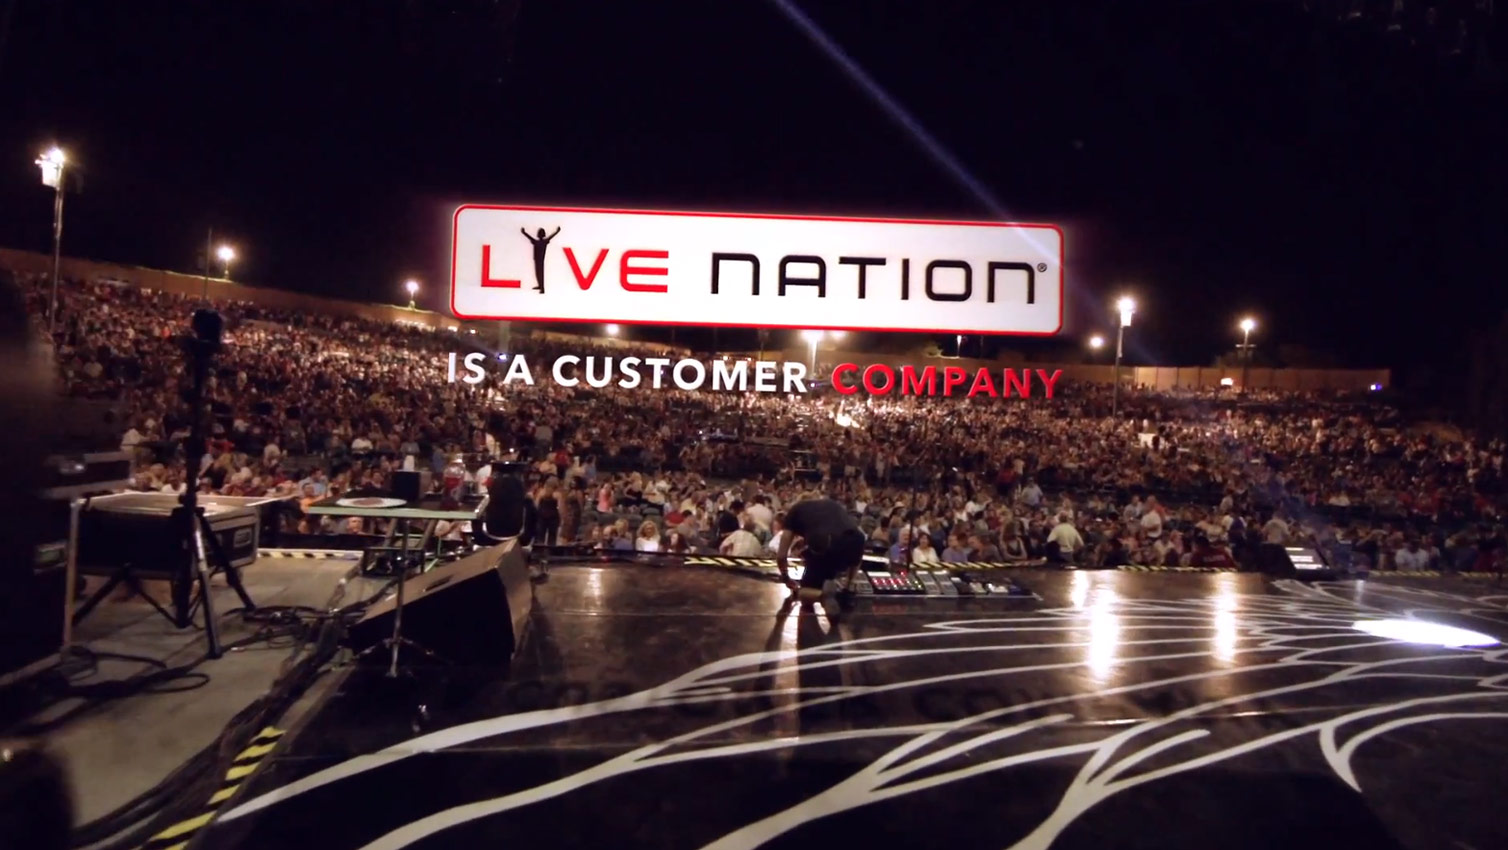 Live Nation reports a record 2015, revenues up 11%